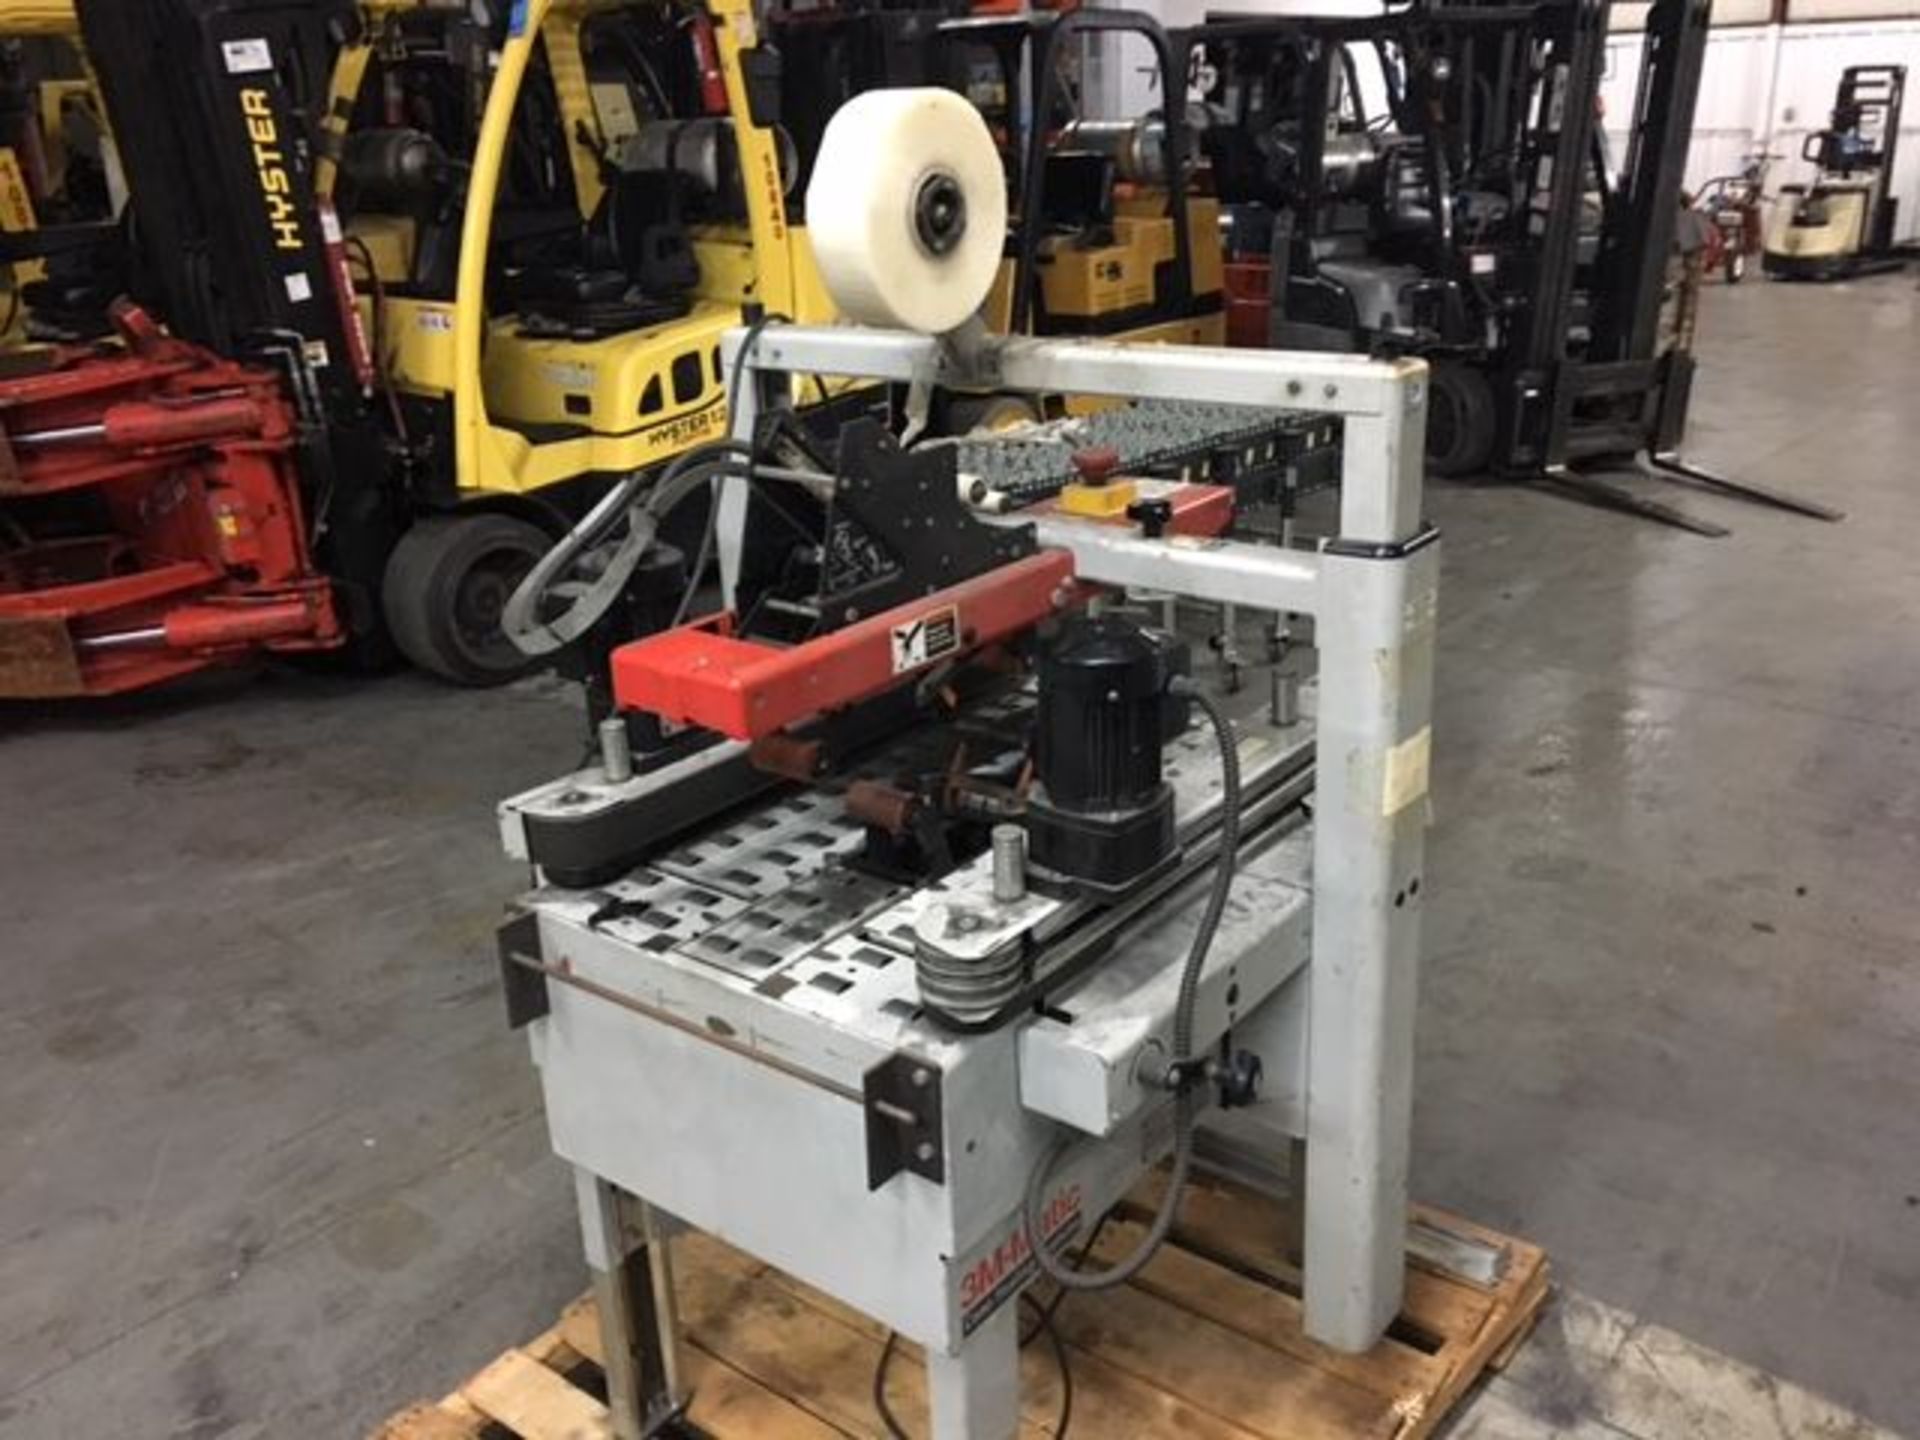 3M-MATIC TYPE 39600 800A3 ADJUSTABLE CASE SEALER; S/N 4860 - LOCATED AT 6600 STOCKTON ROAD, - Image 2 of 4